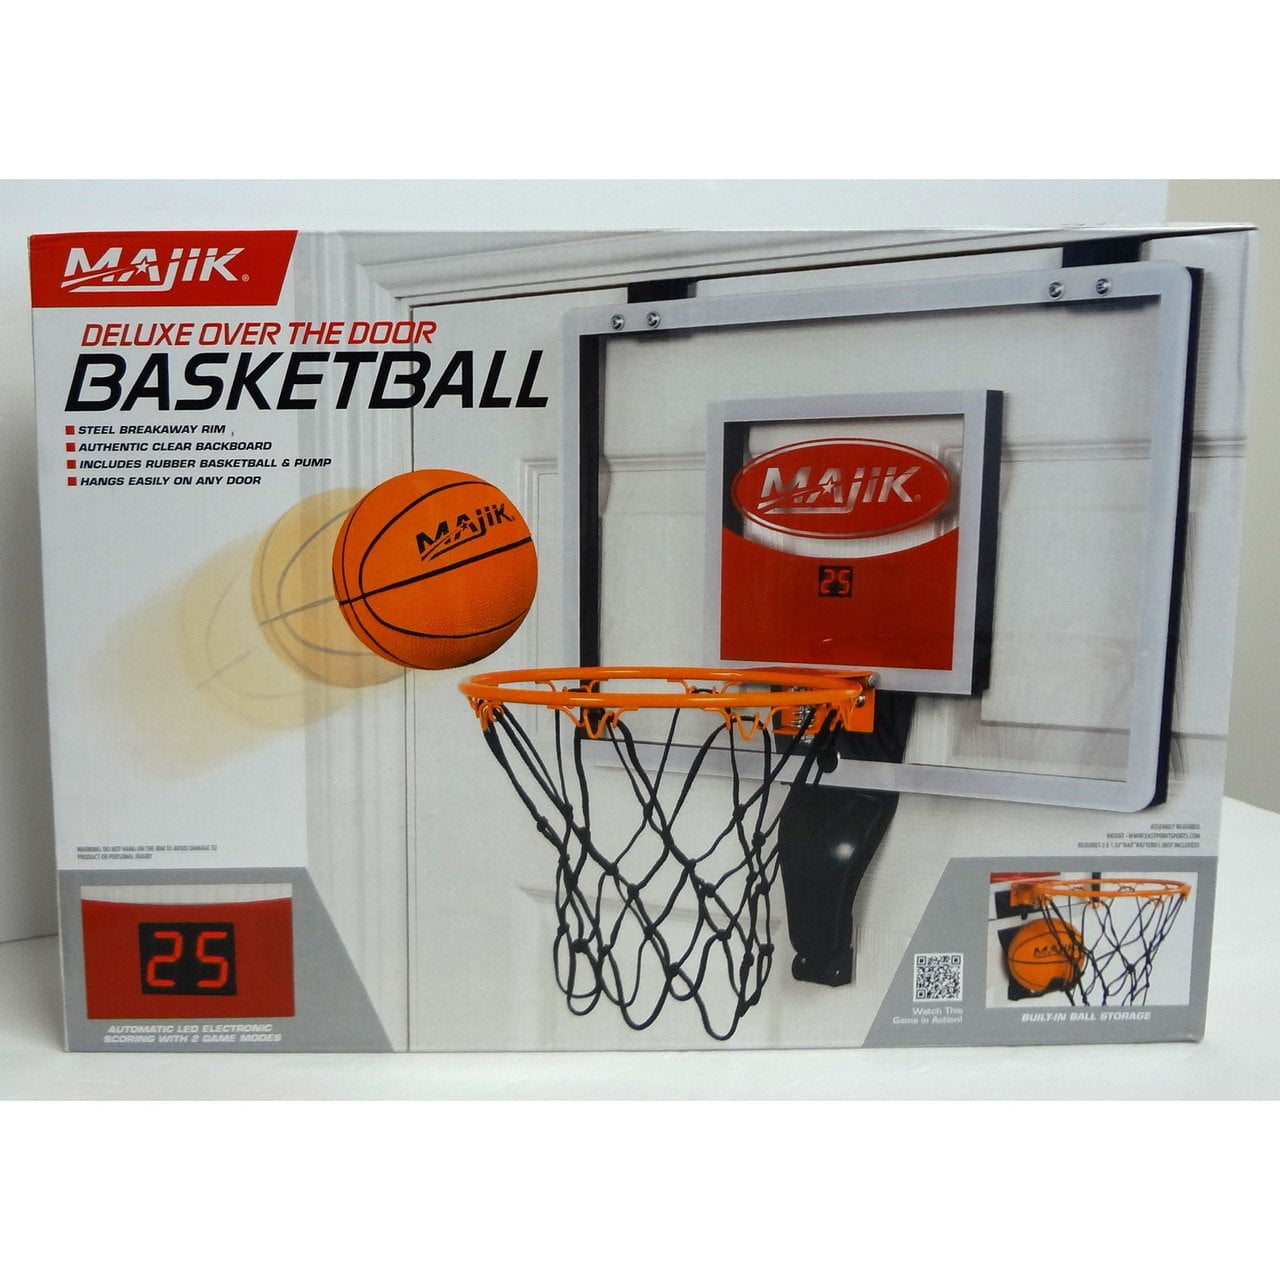 Ball & Pump Included Majik Deluxe Over The Door Basketball Game LED Scoring 